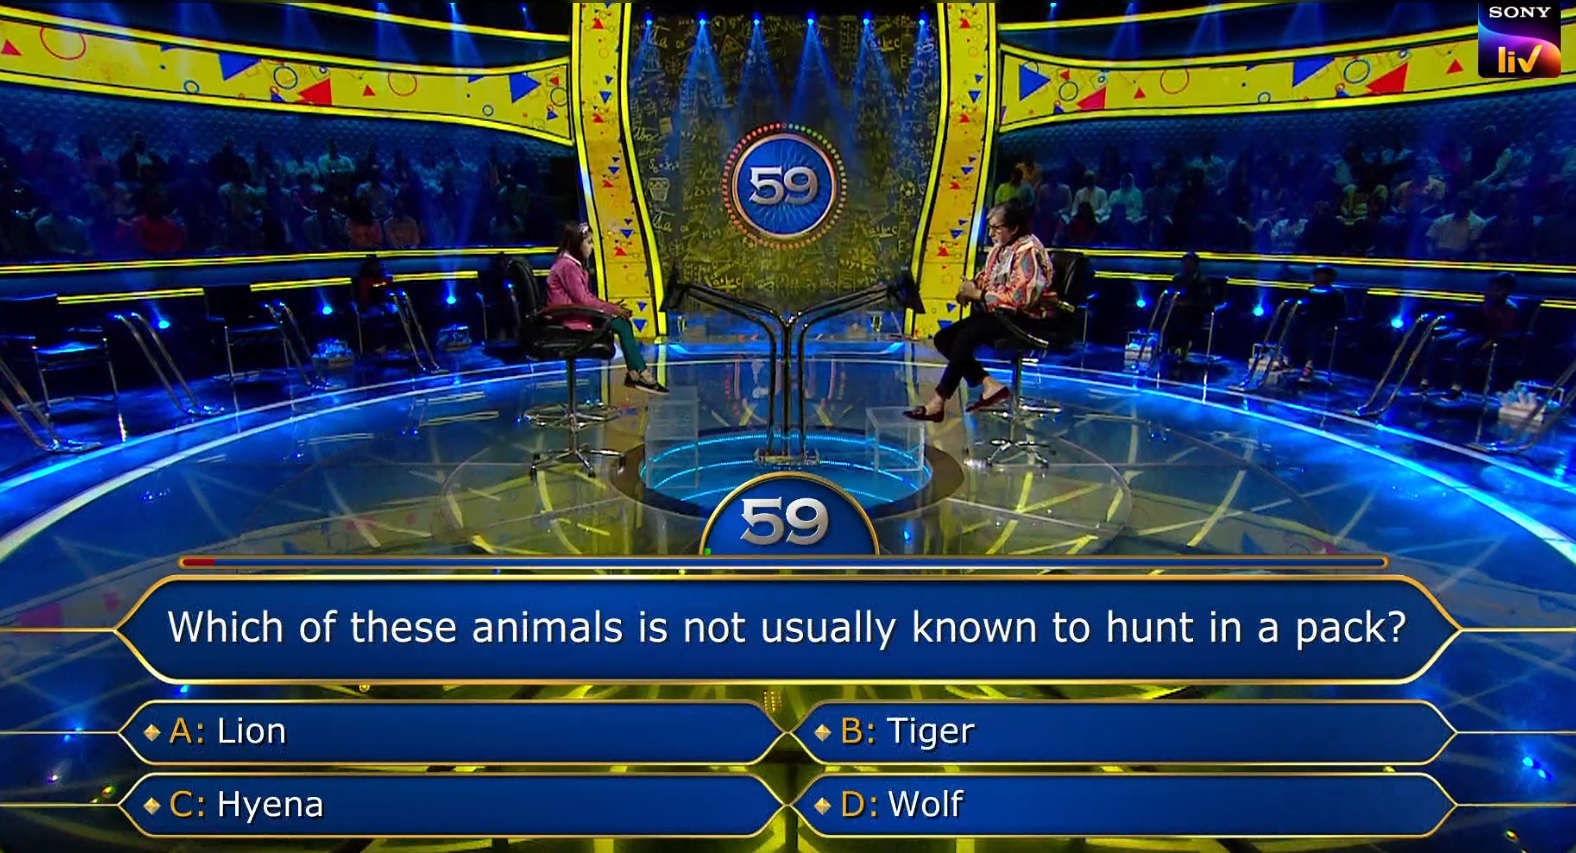 Ques : Which of these animals is not usually known to hunt in a pack?